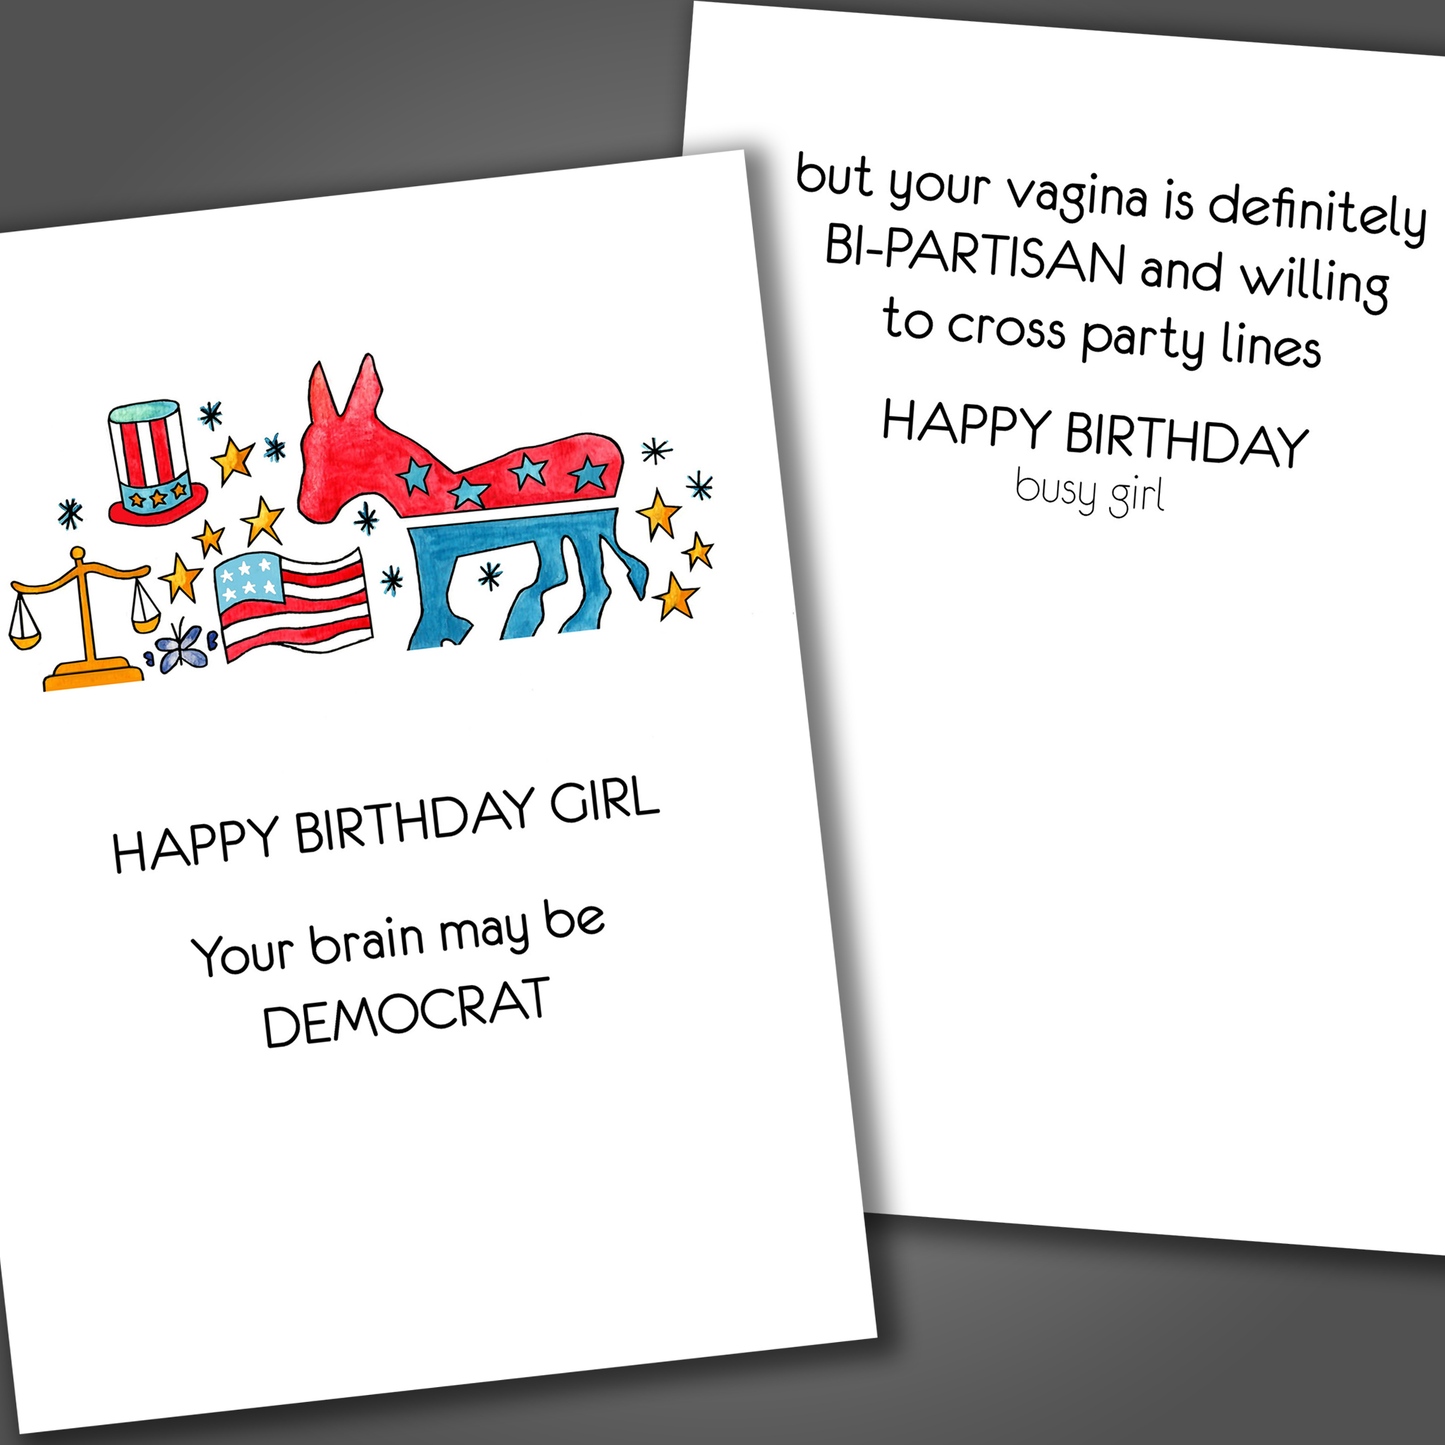 Funny happy birthday card for a woman with a drawing of a donkey on the front of the card and funny joke inside the card that calls her vagina bi-partisan and ends in happy birthday